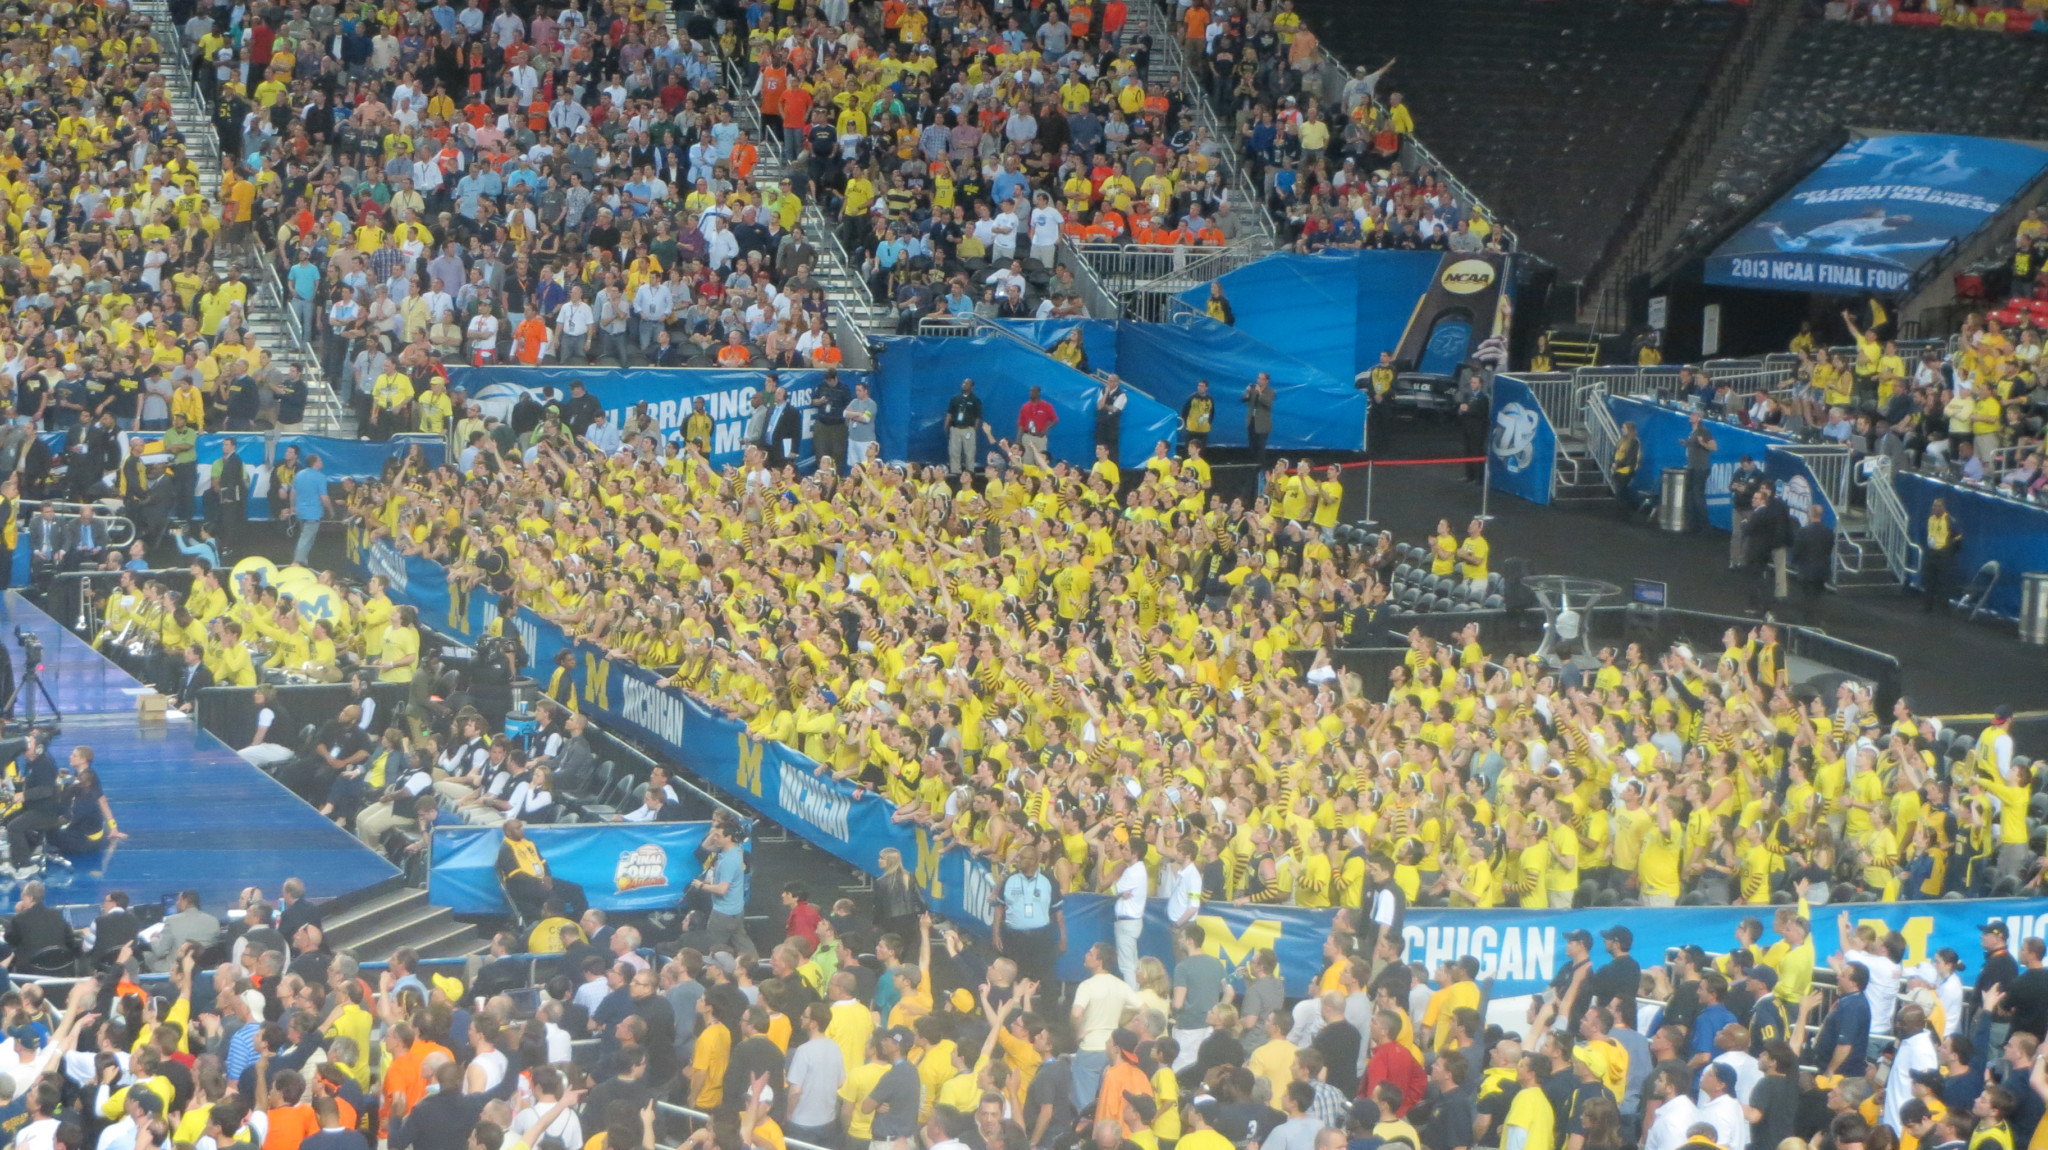 a crowd of people in yellow shirts